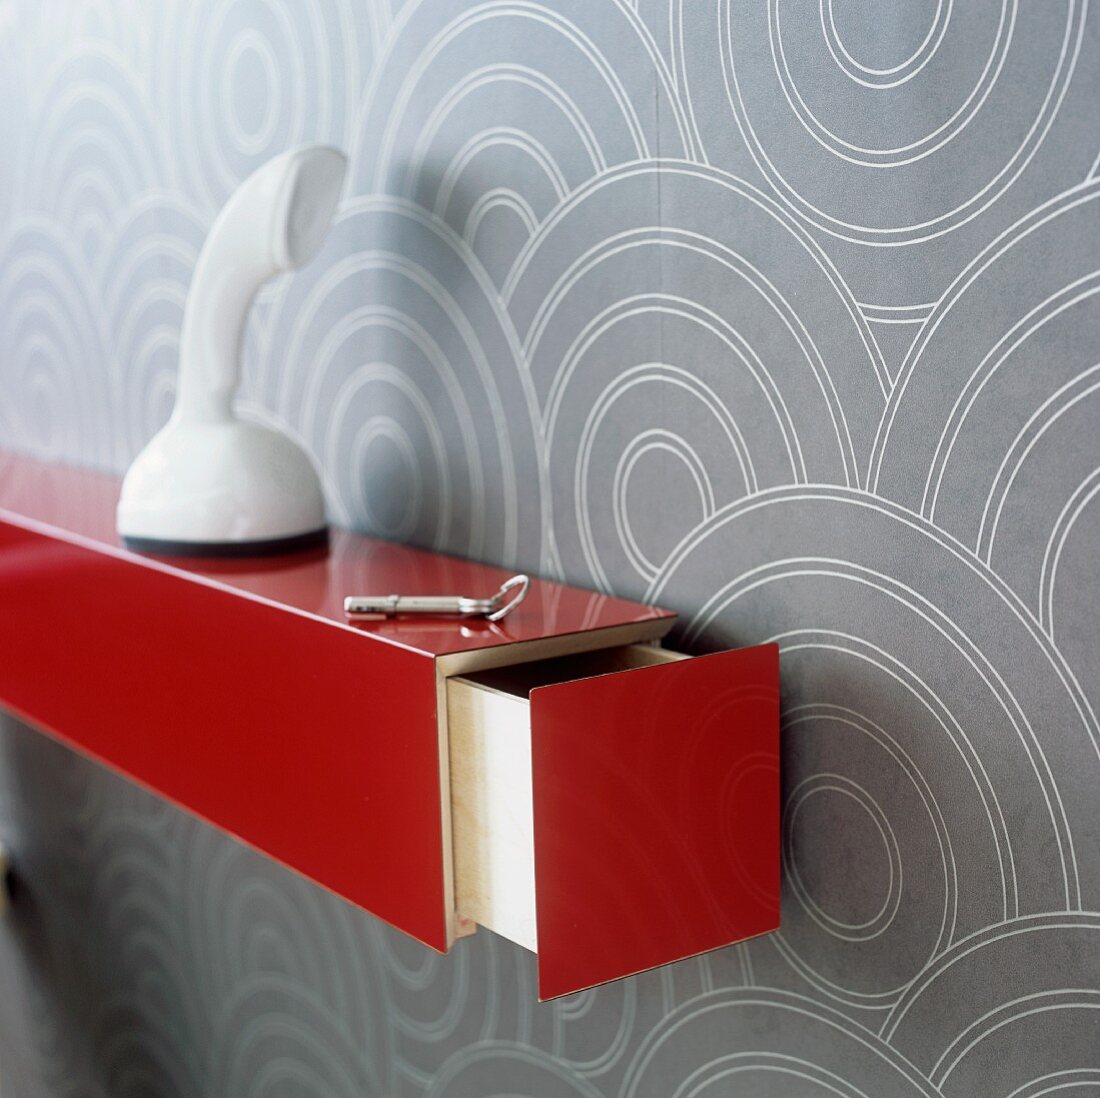 A white telephone on red shelf with an open drawer mounted on a wall hung with a geometric pattern